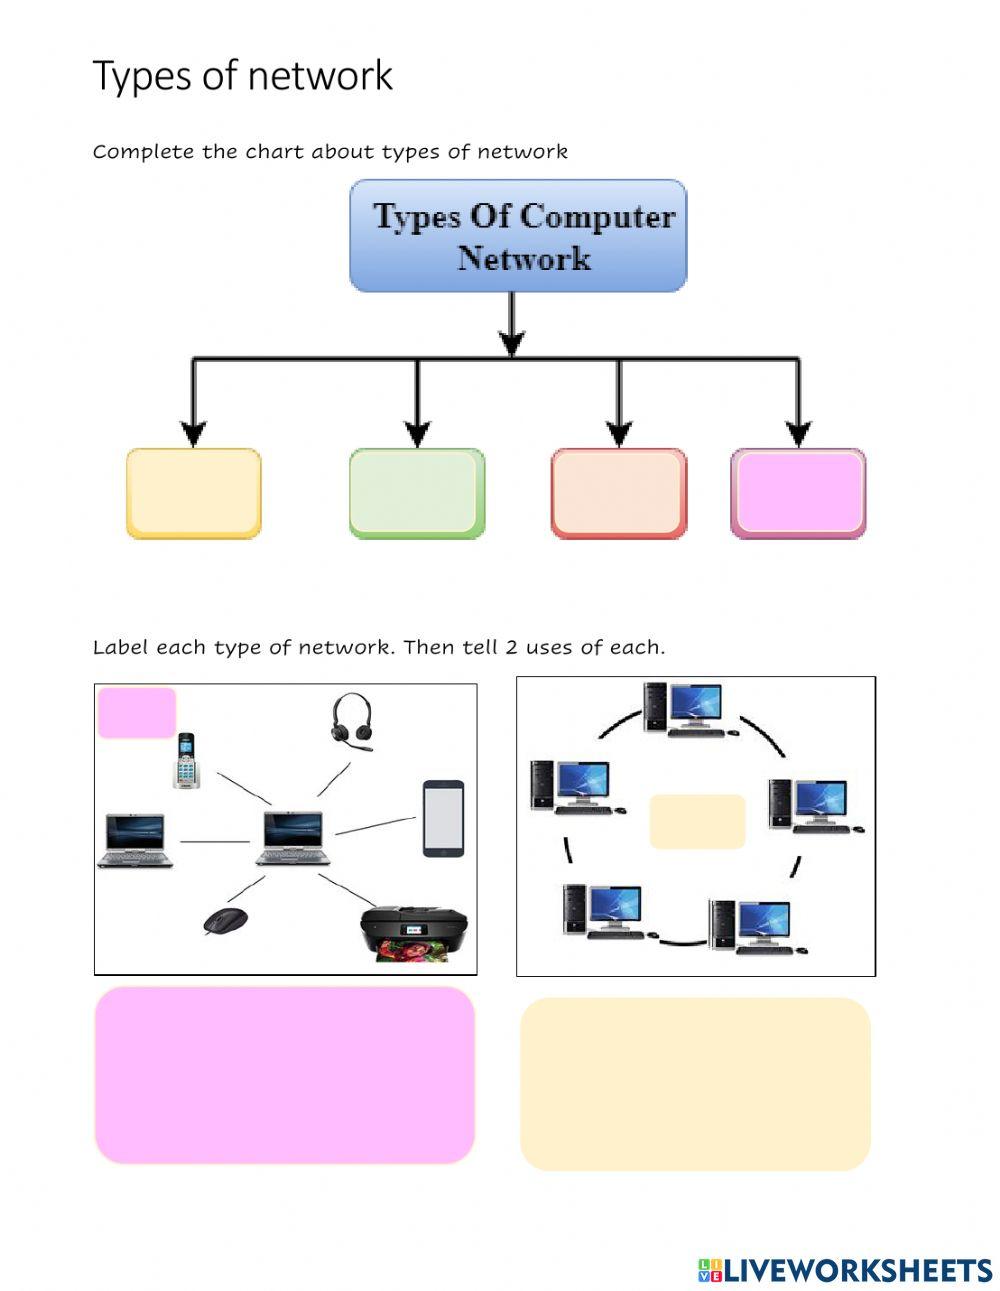 Type of network